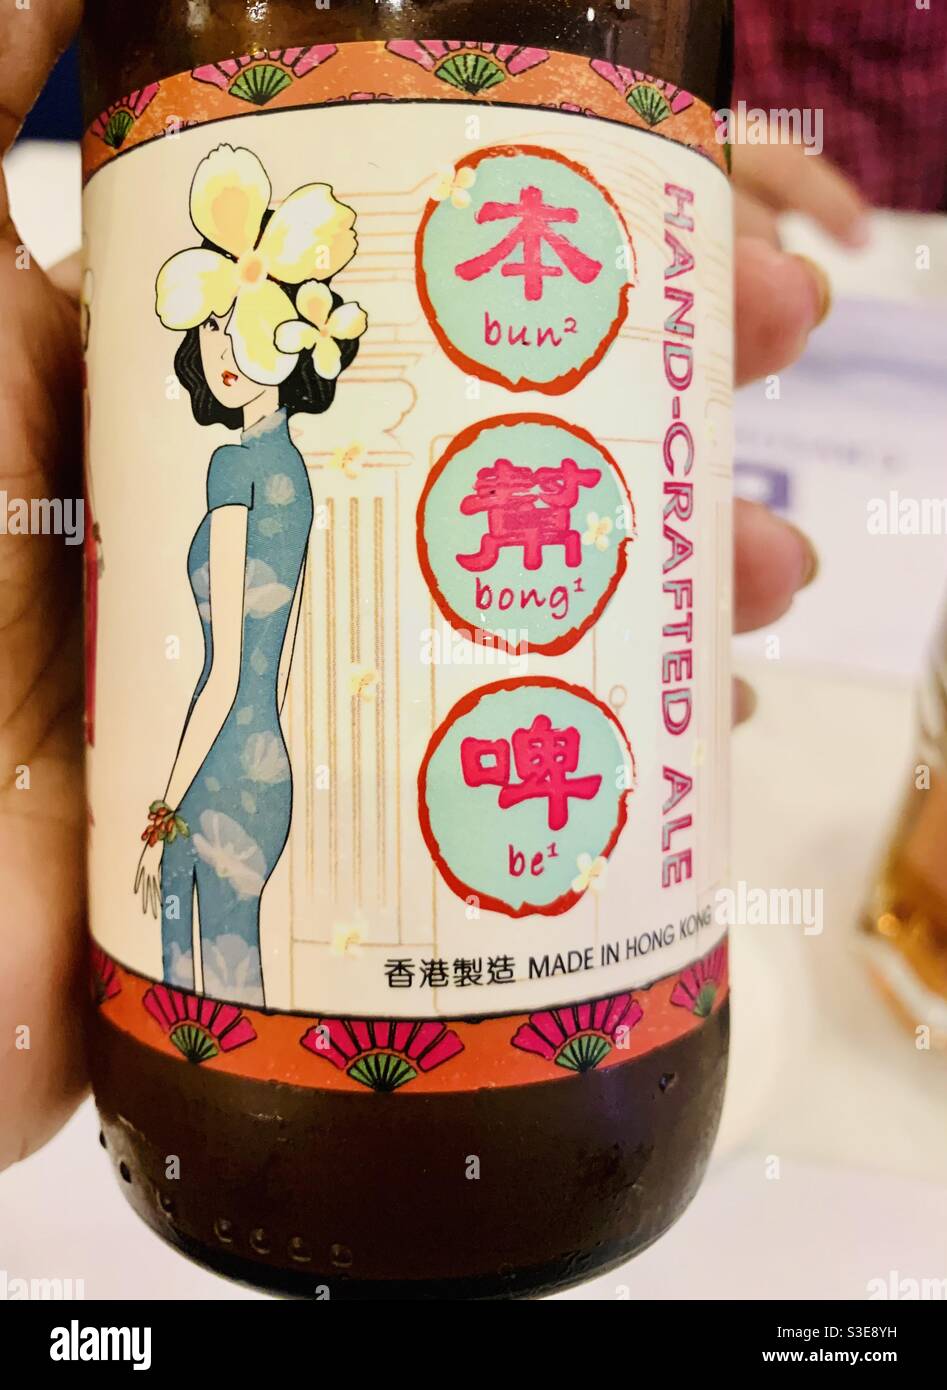 A bottle of Craft beer from Hong Kong. Stock Photo